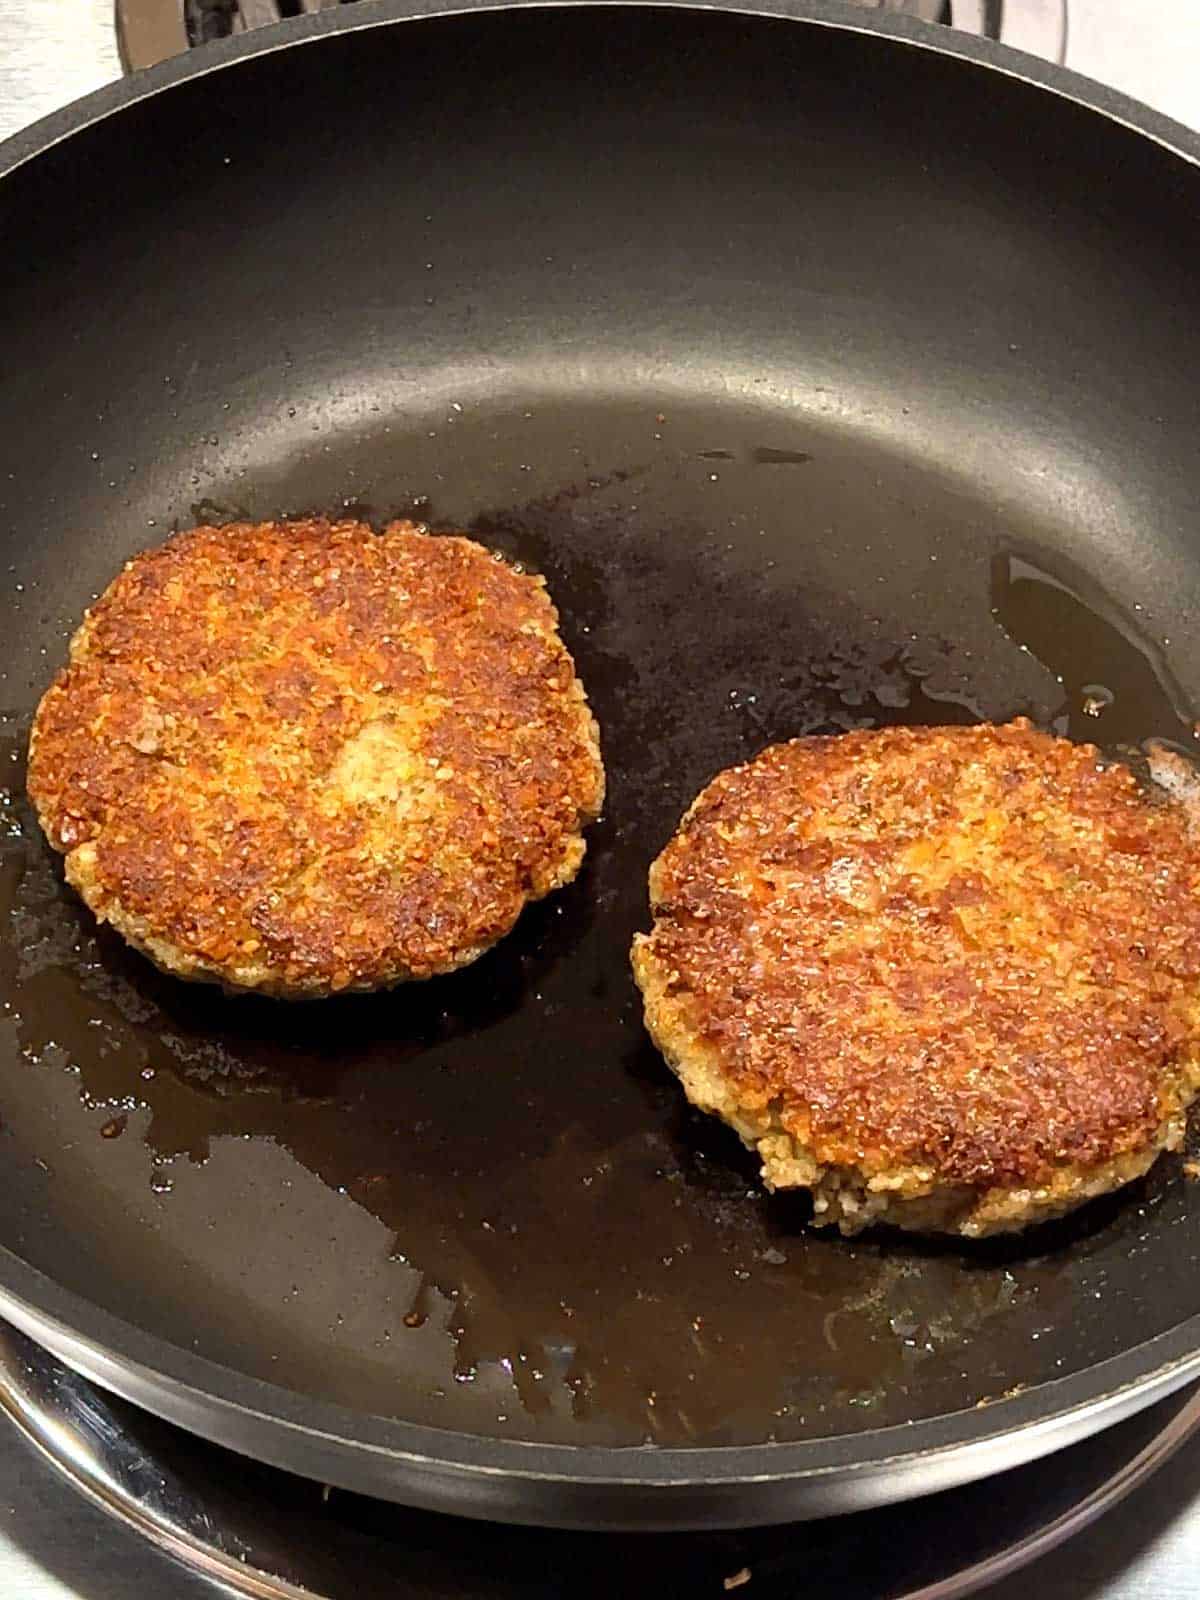 Cooking the patties in a skillet over medium heat.